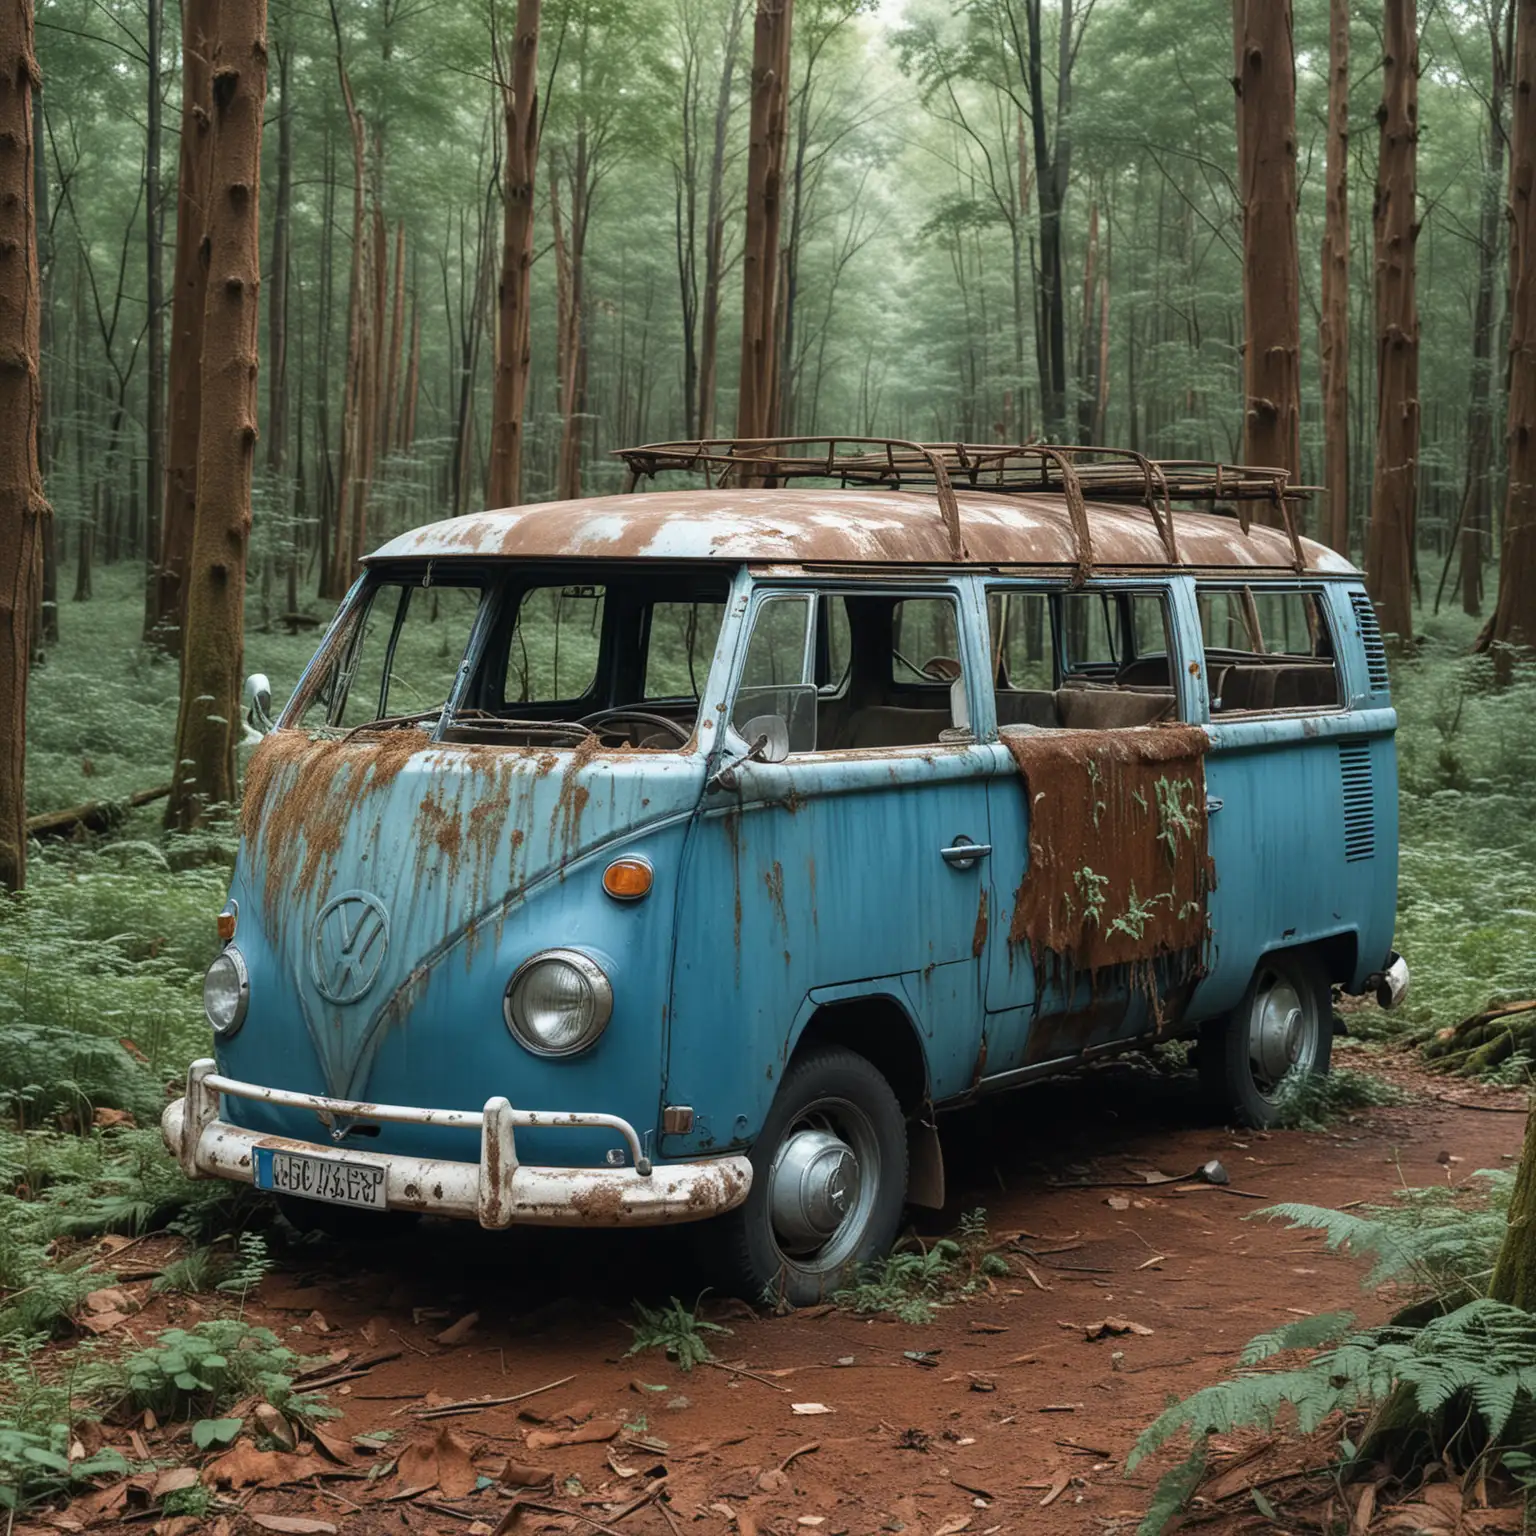 Draw a scene of a decaying 1966 Volkswagen Transporter T1 abandoned in a forest clearing. The blue paint is faded, and rust covers its frame. A  skeleton rests in the passenger seat. Surrounding the scene, nature is reclaiming the area with overgrowth.